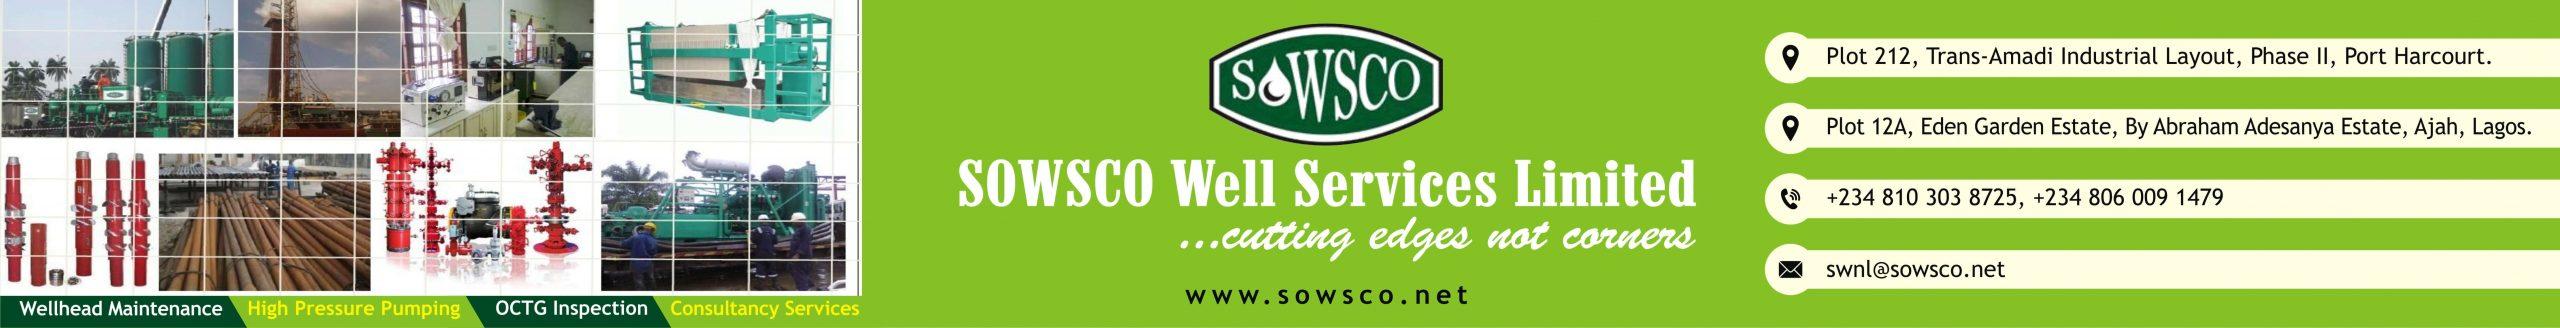 SOWSCO Banner Ad